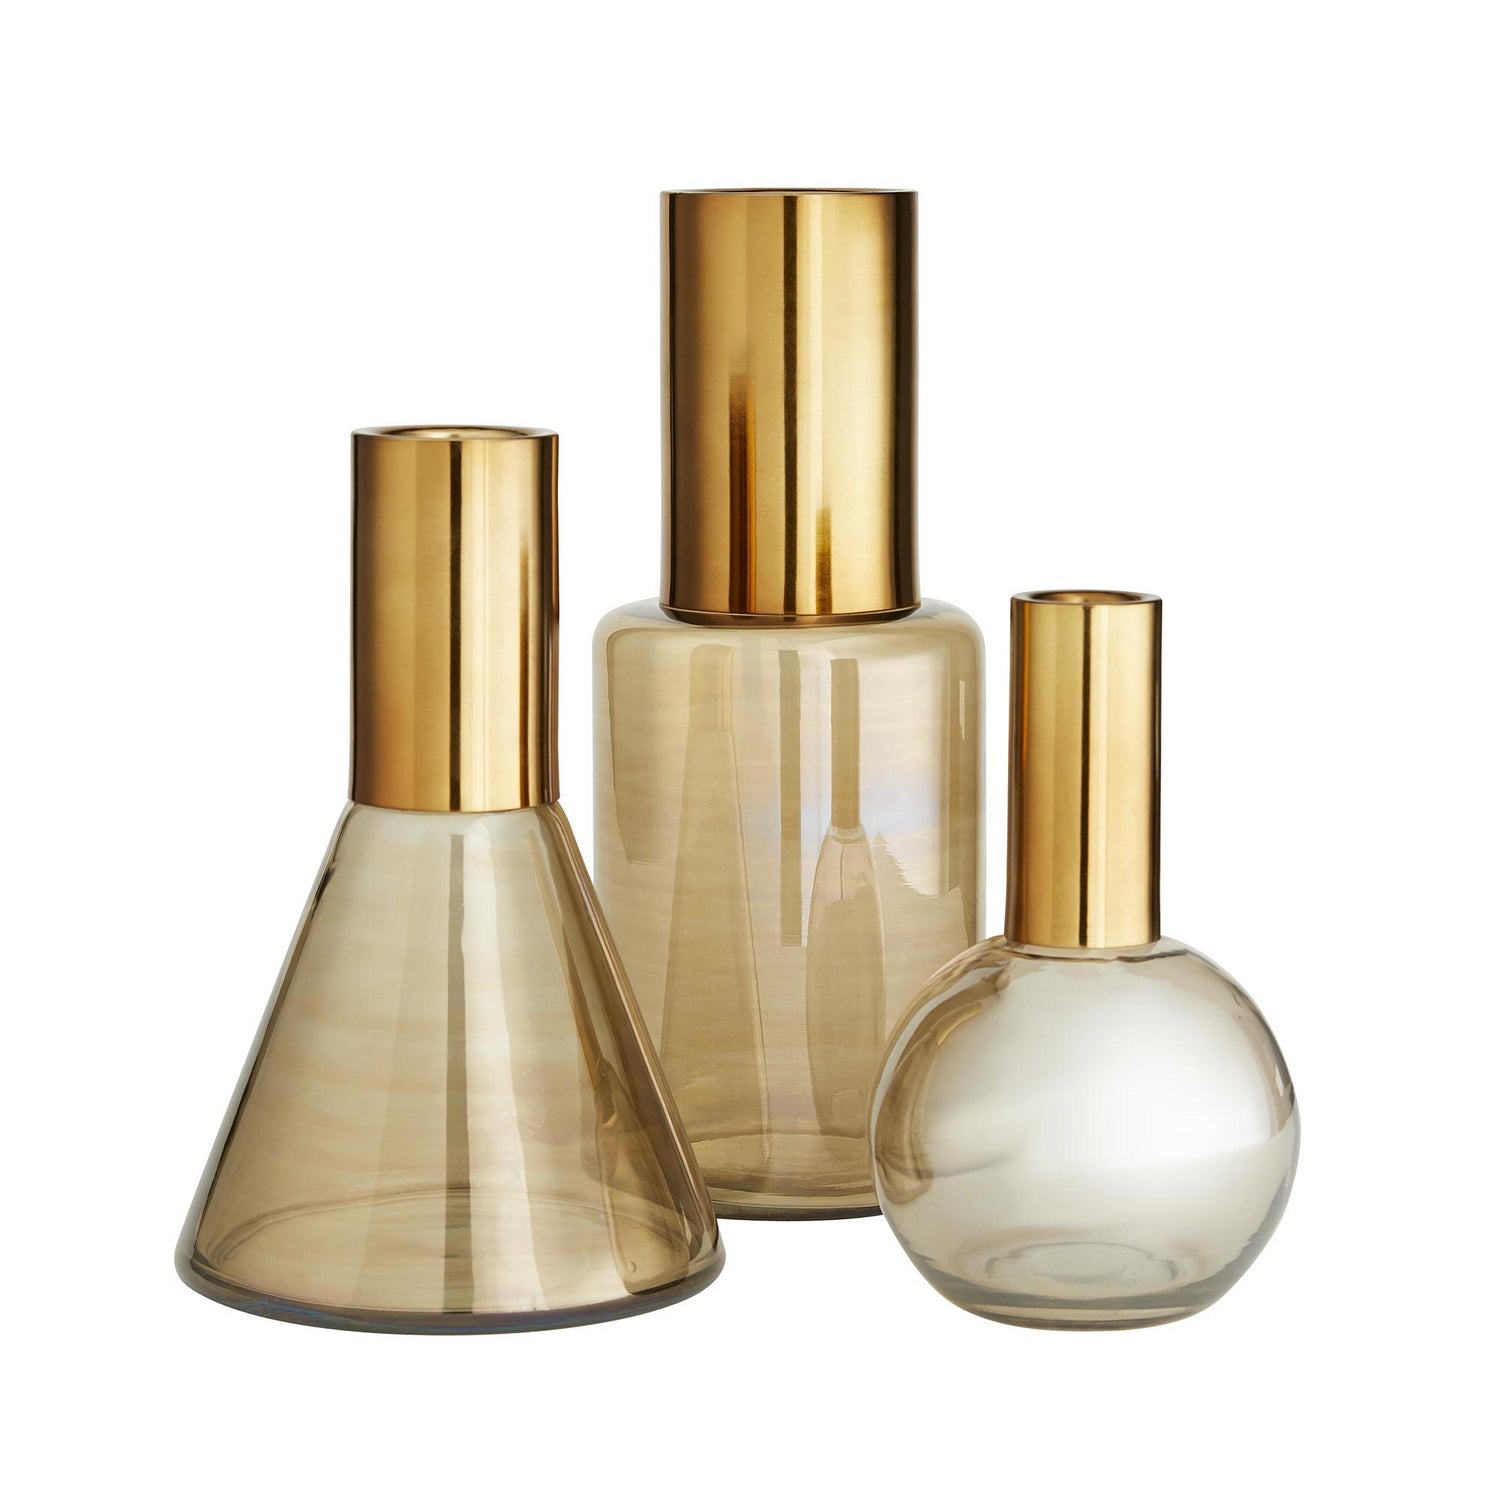 Vases Set of 3 from the Union collection in Smoke Luster finish